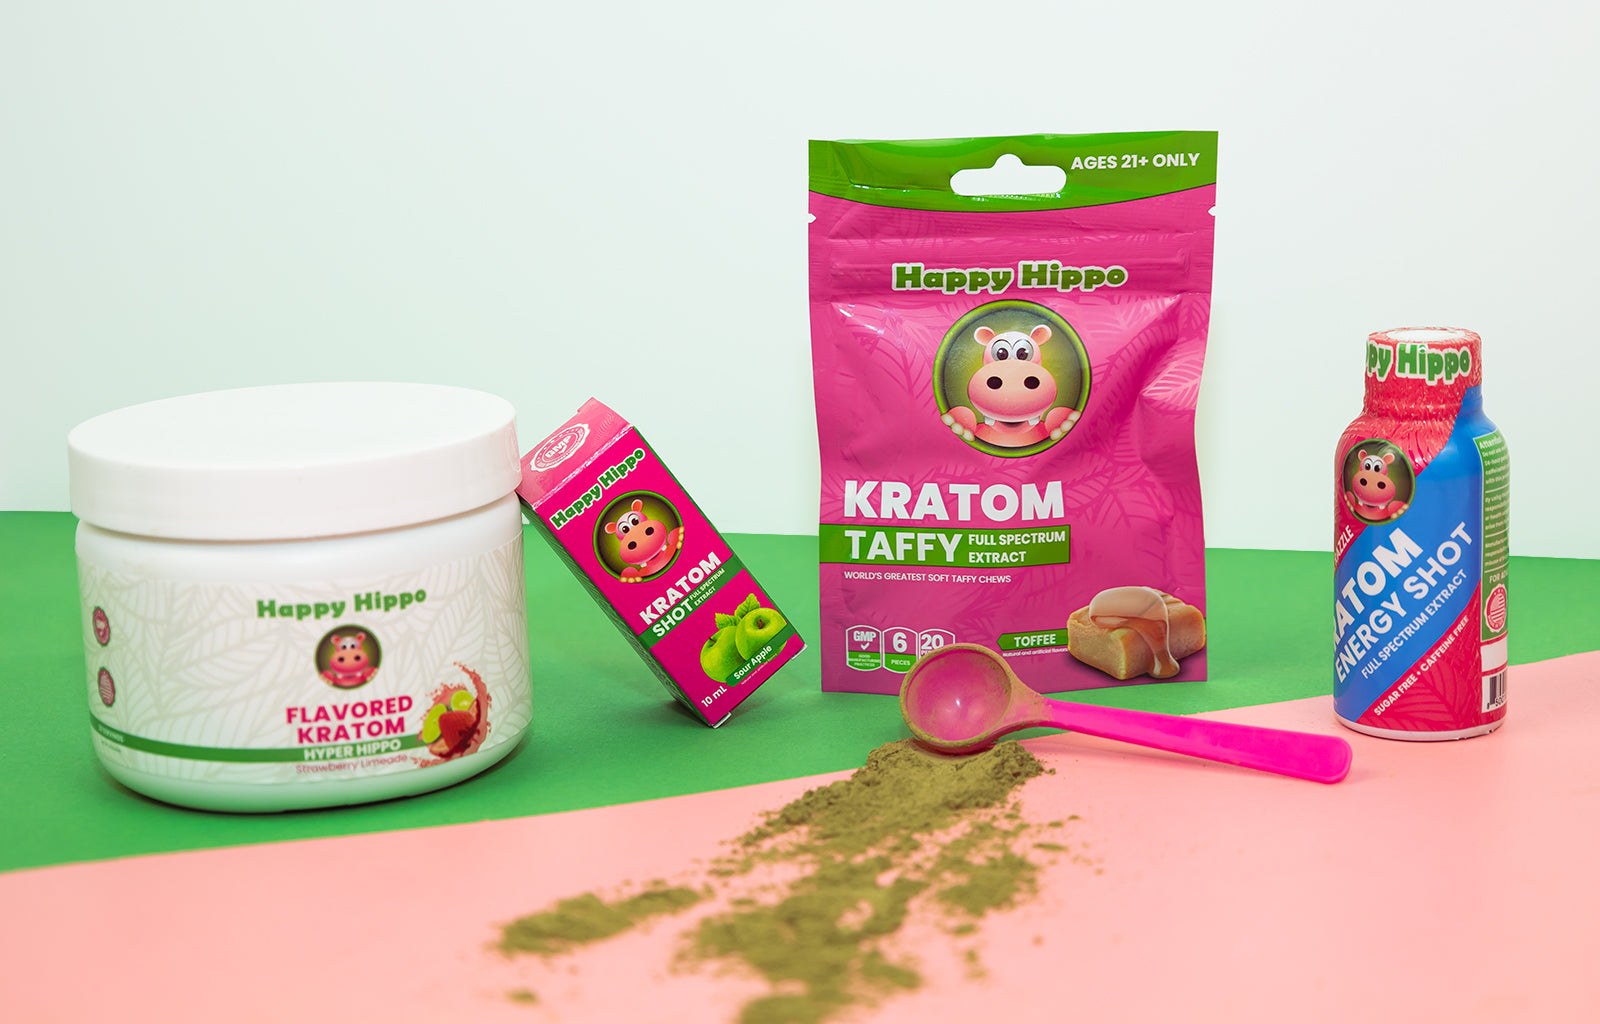 Featured Image depicting an array of Happy Hippo branded kratom products